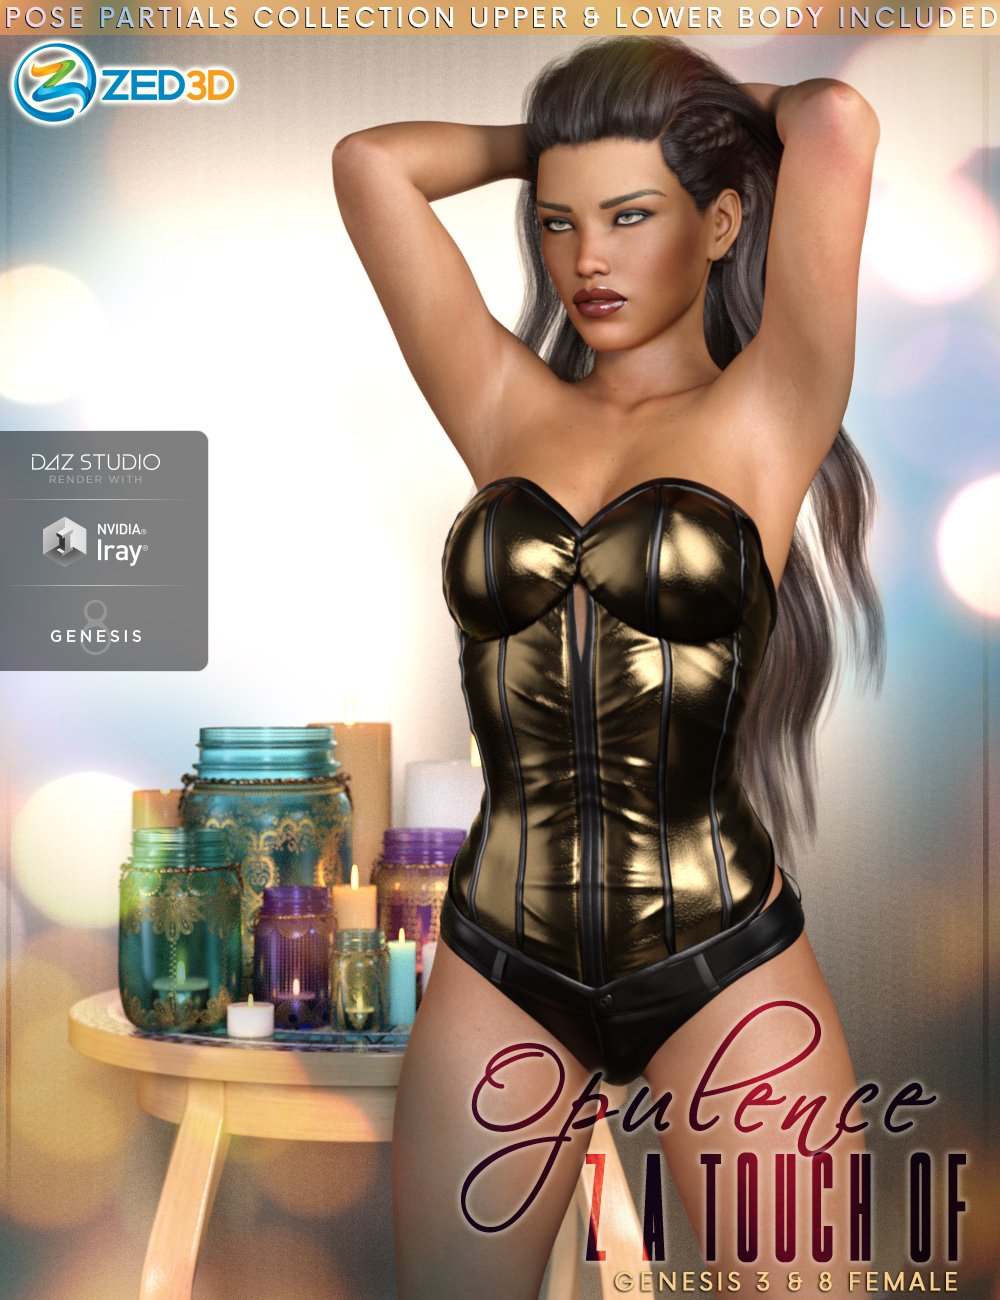 z touch of opulence poses and partials for genesis 3 and 8 female 00 main daz3dafedbba953d314ab